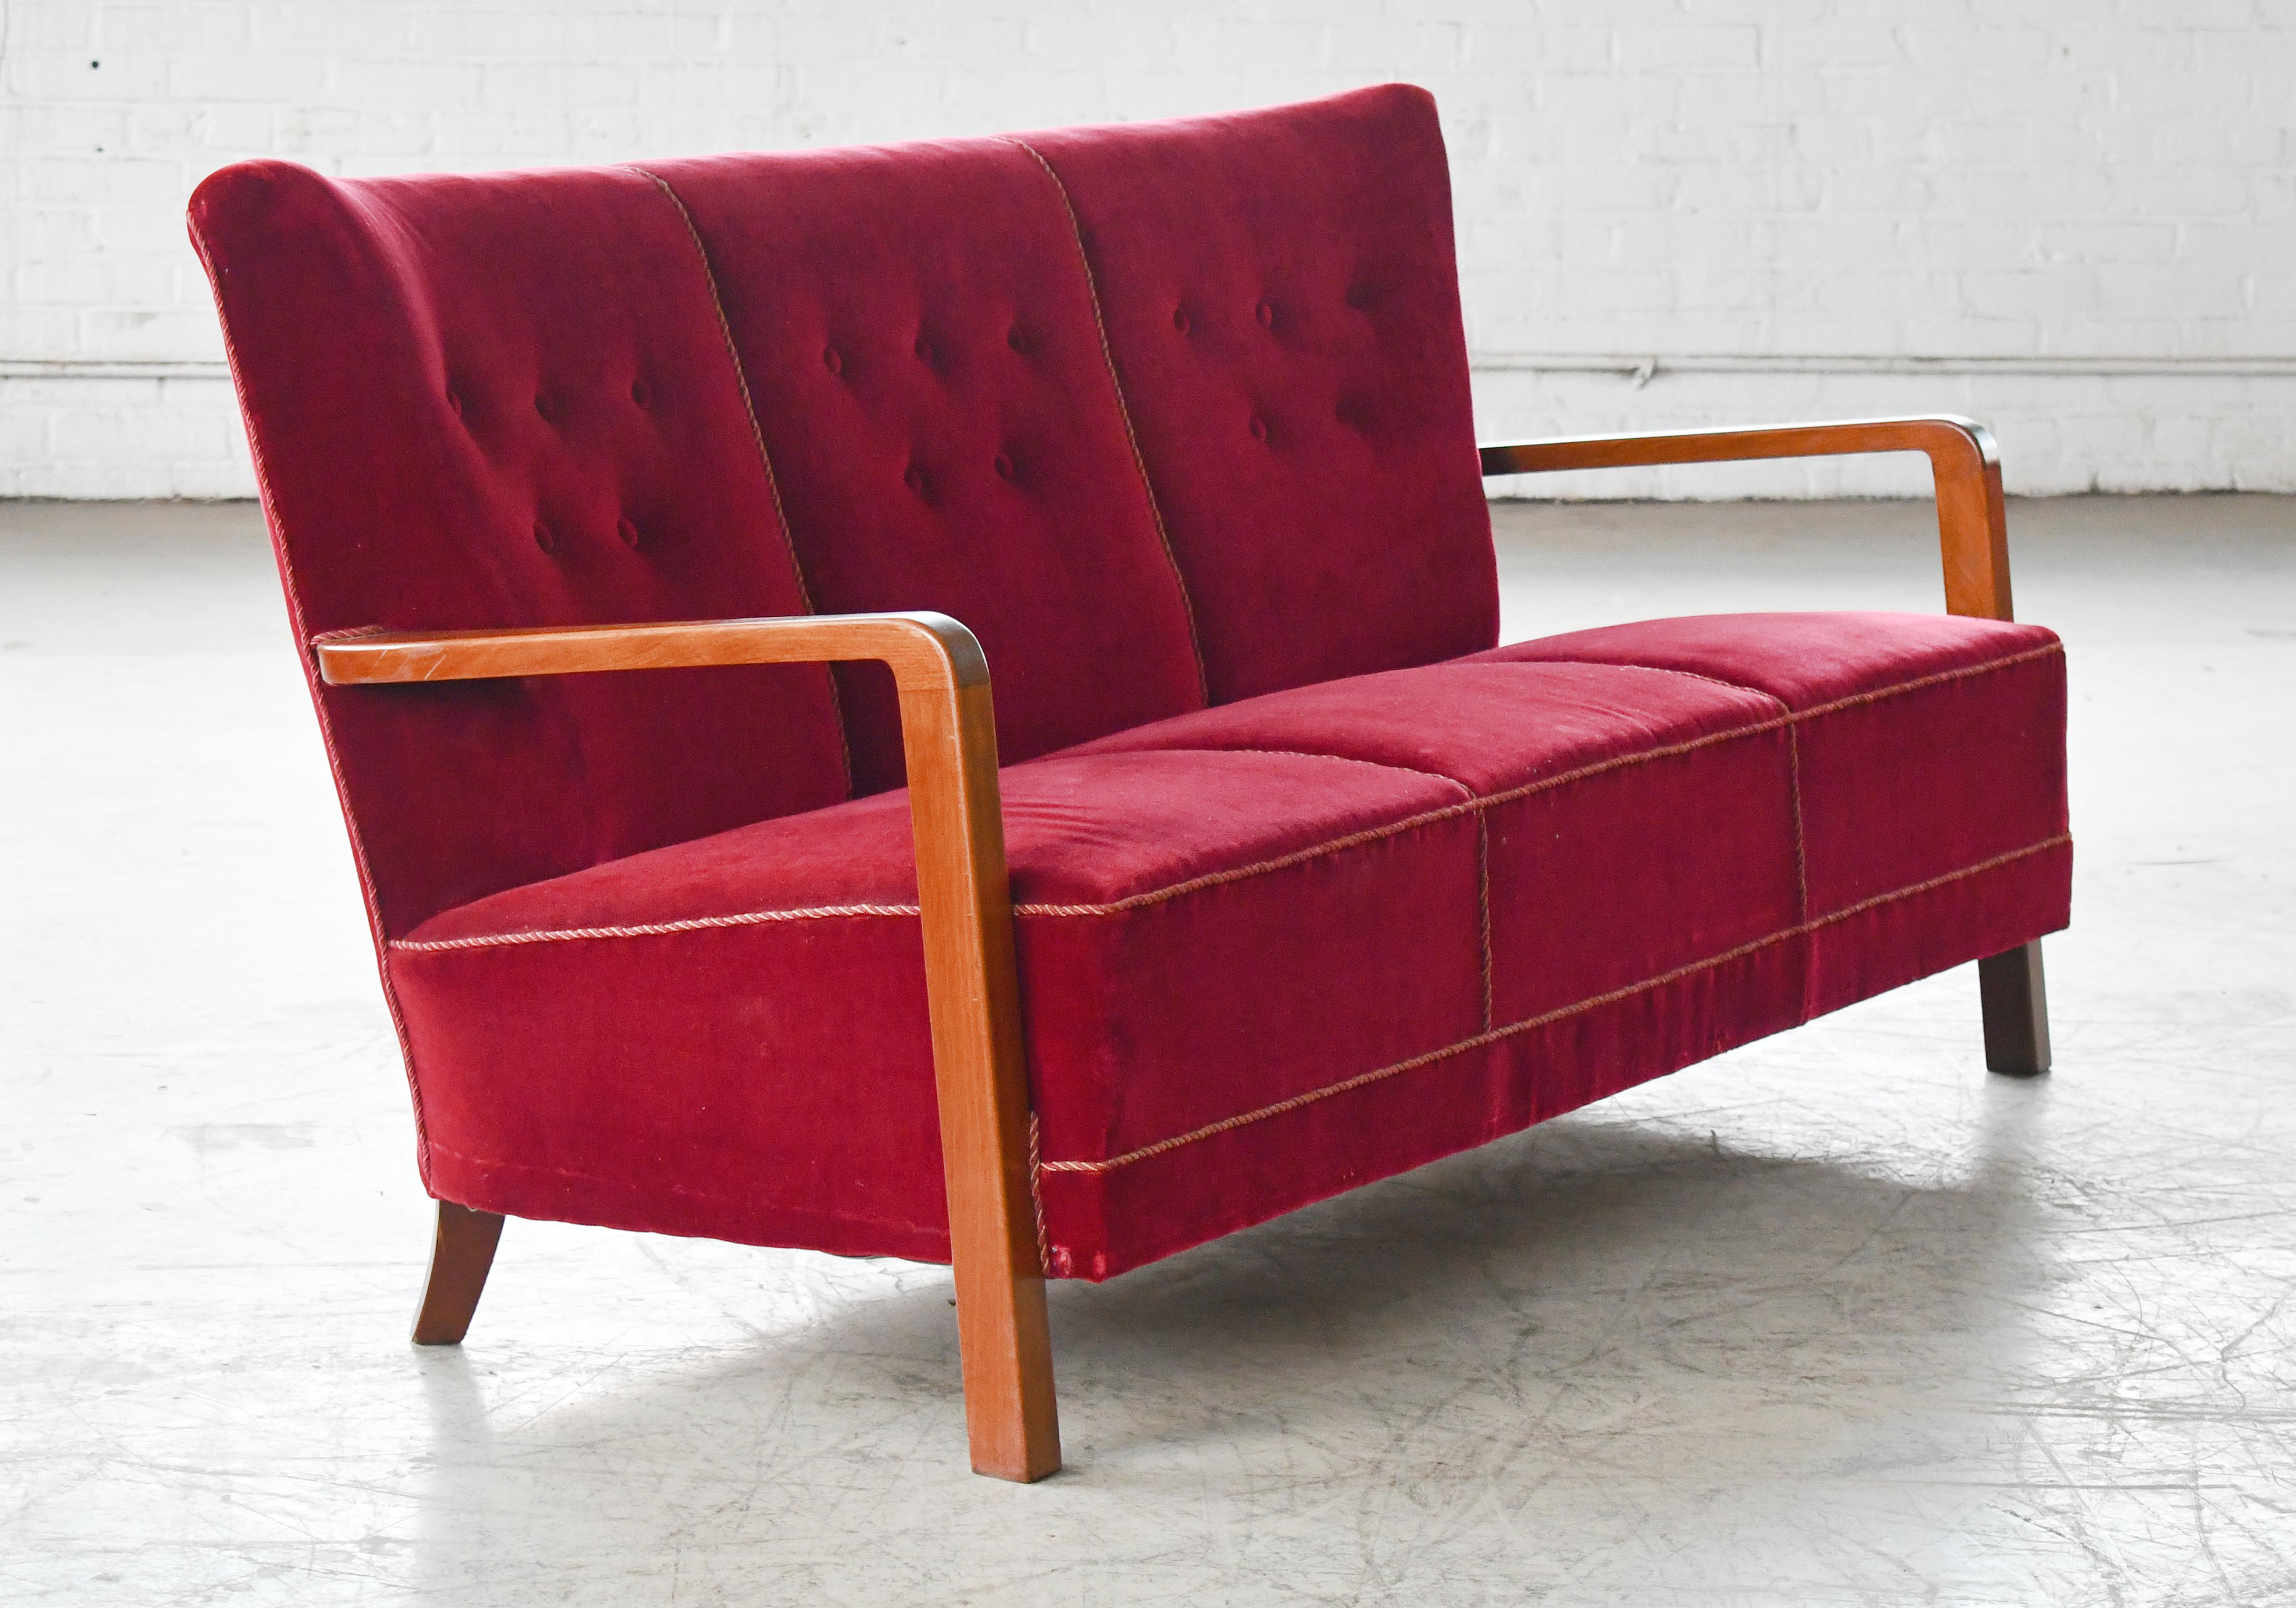 Superb Danish late Art Deco early midcentury sofa from the late 1930's or early 1940s with spring cushions and beautiful open armrests and legs carved in solid Cuban mahogany with great grain and patina. We just love the simple yet very refined